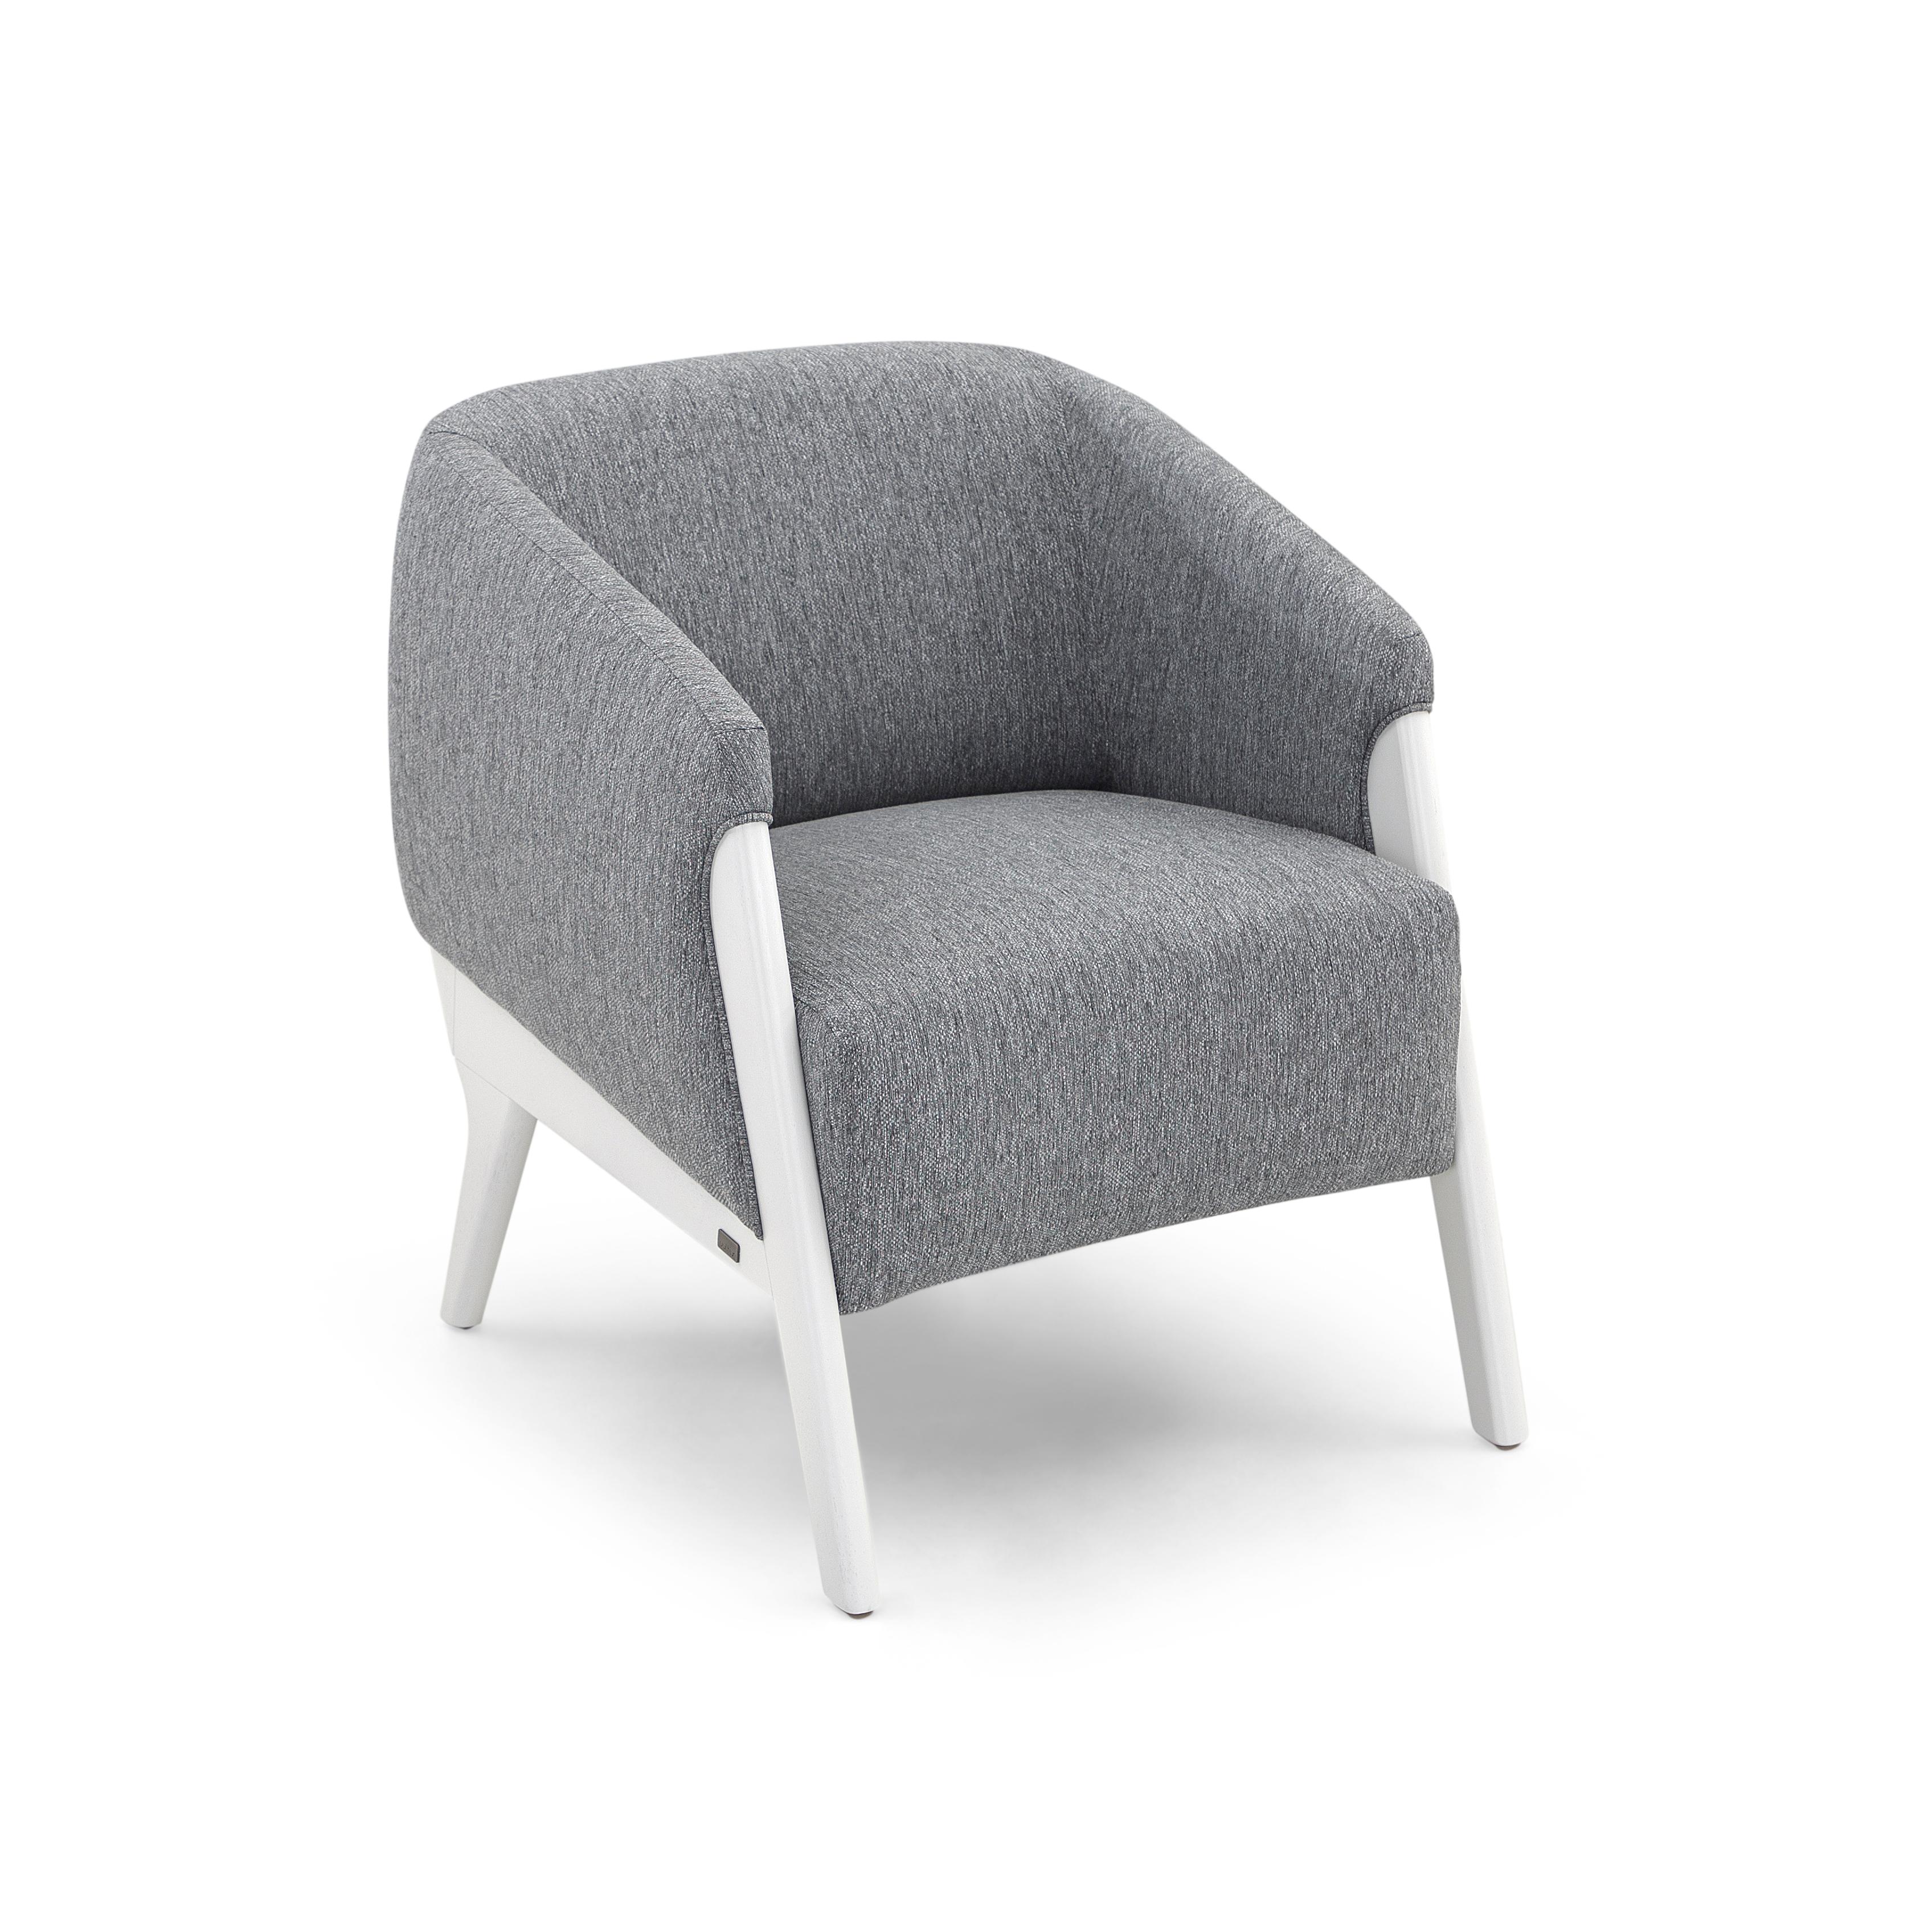 Abra Armchair in Gray Fabric and White Wood Finish In New Condition For Sale In Miami, FL